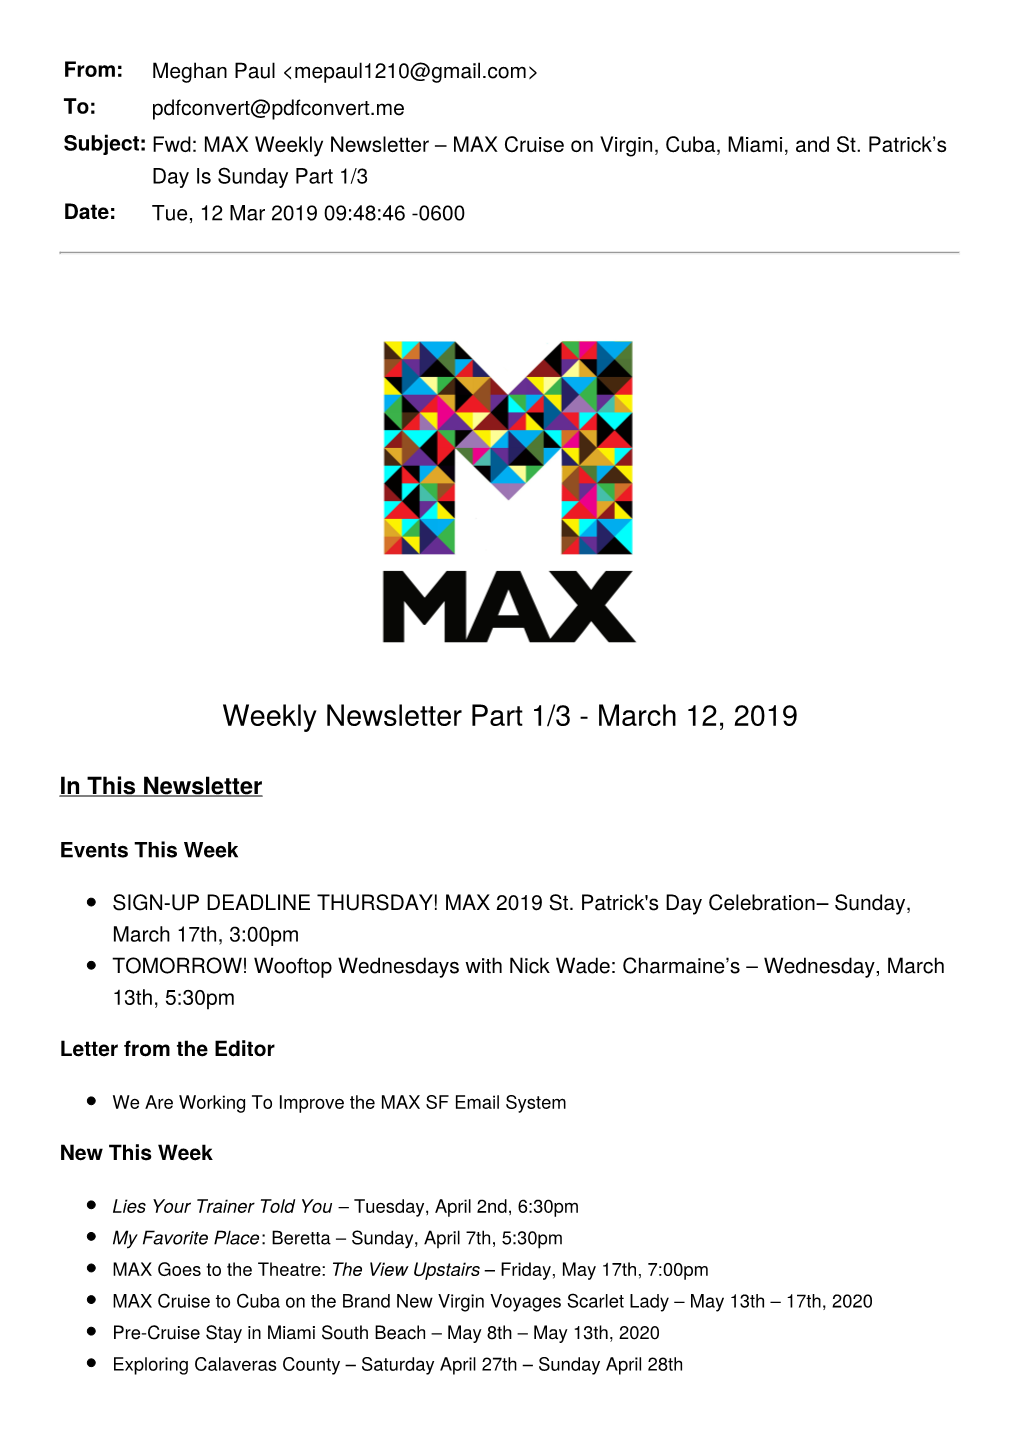 Fwd: MAX Weekly Newsletter MAX Cruise on Virgin, Cuba, Miami, And